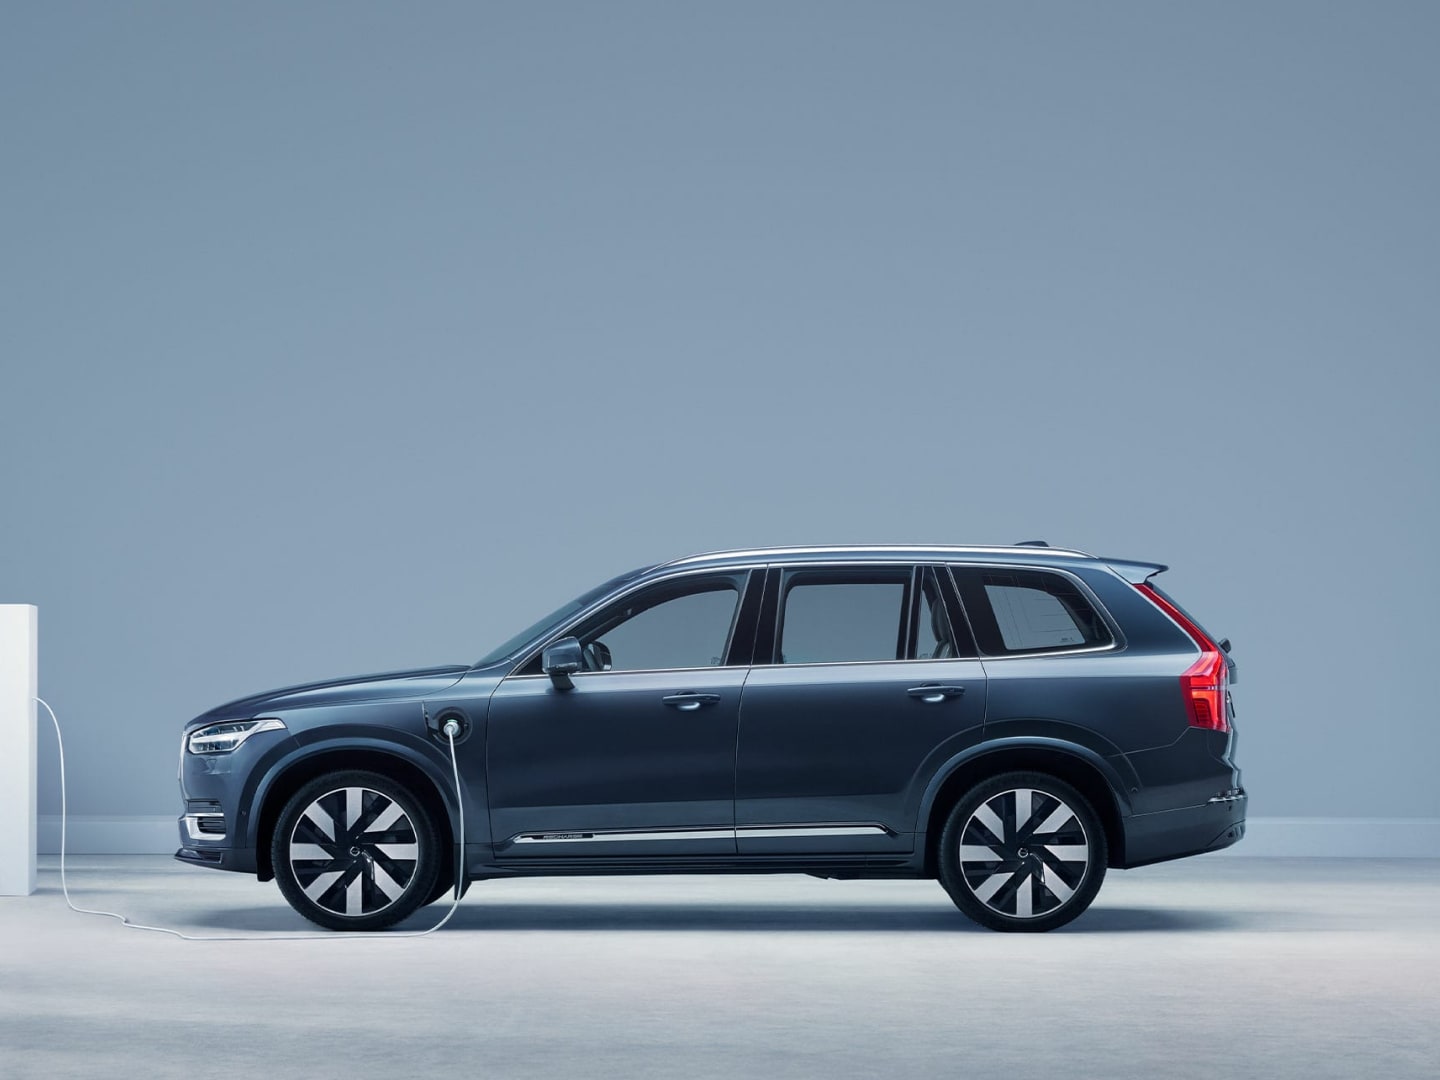 The side profile of a Volvo XC90 plug-in hybrid SUV.